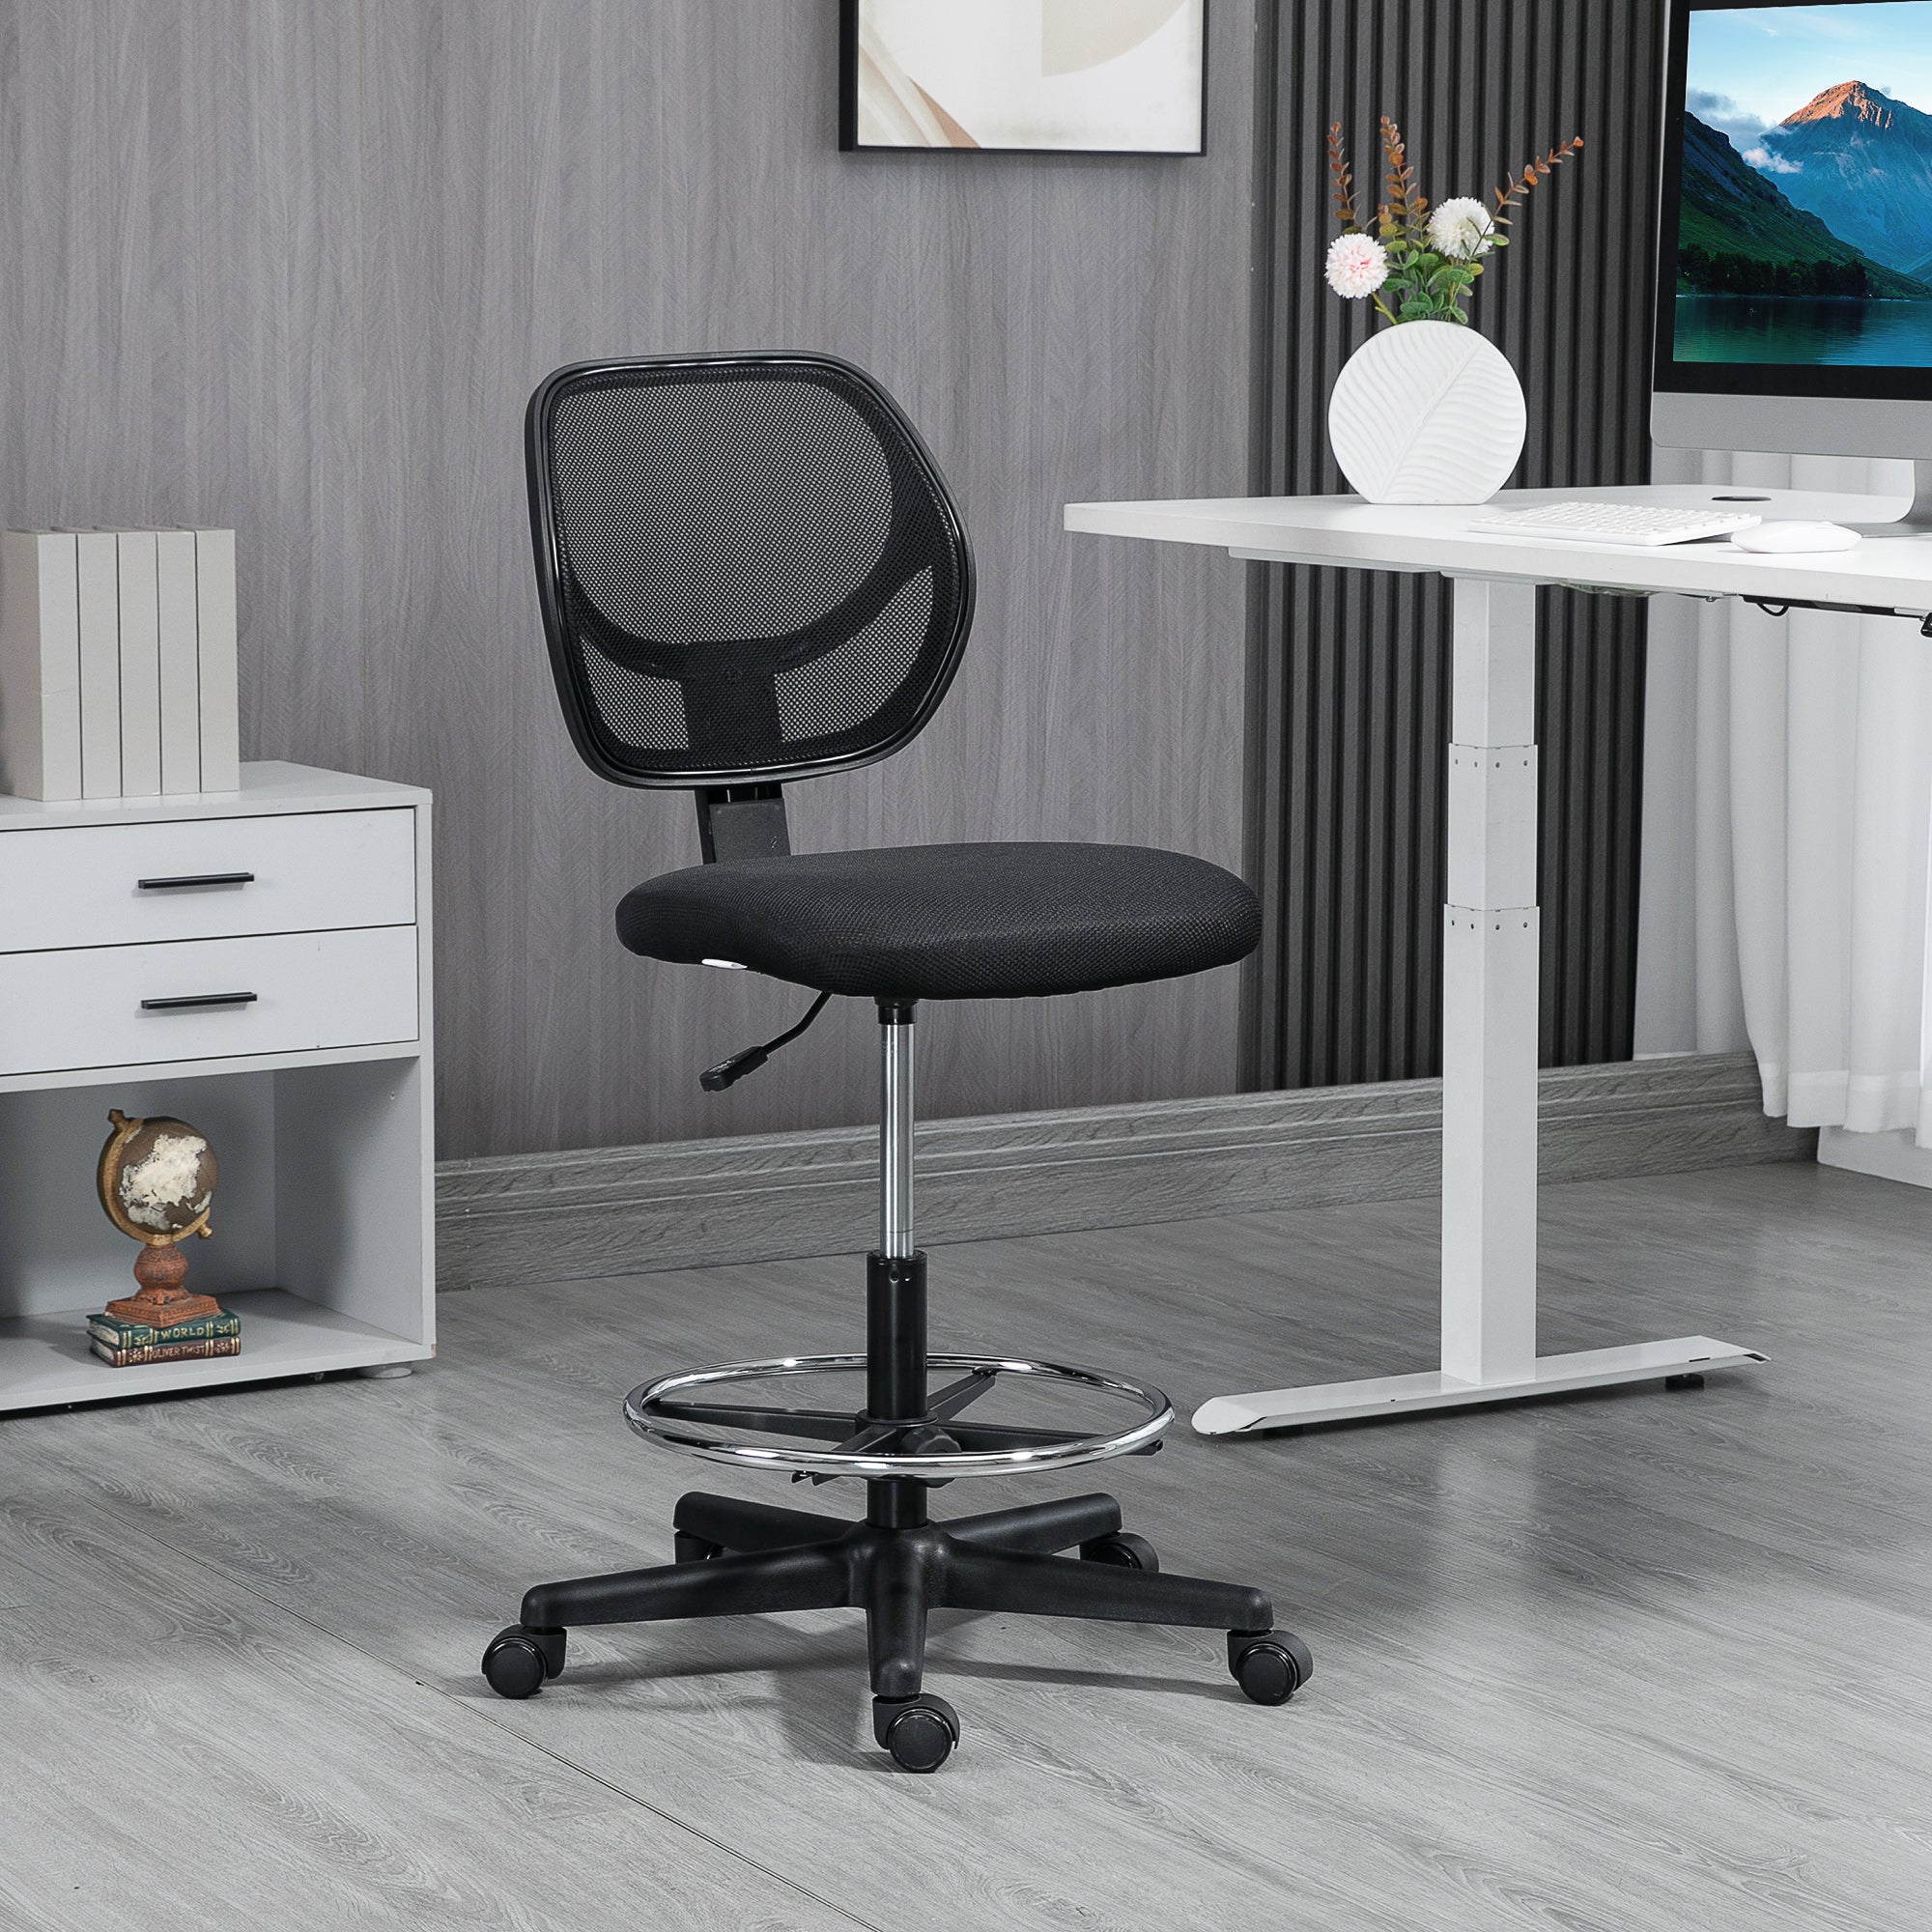 Vinsetto Ergonomic Mesh Standing Desk Chair with Adjustable Footrest Ring and Seat Height Black